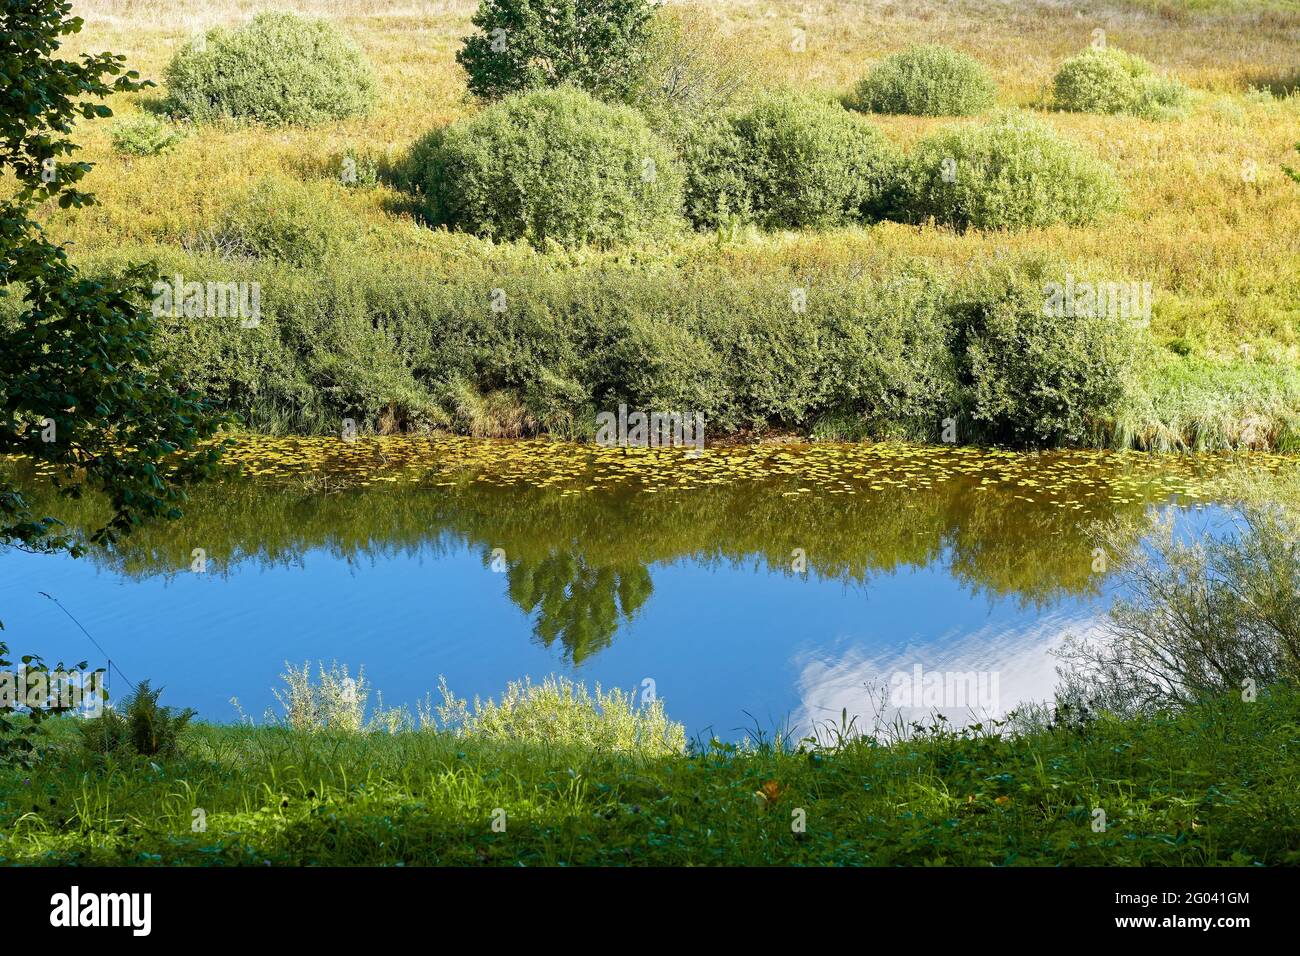 Landscape with a river, which reflects the blue sky with white clouds. Stock Photo